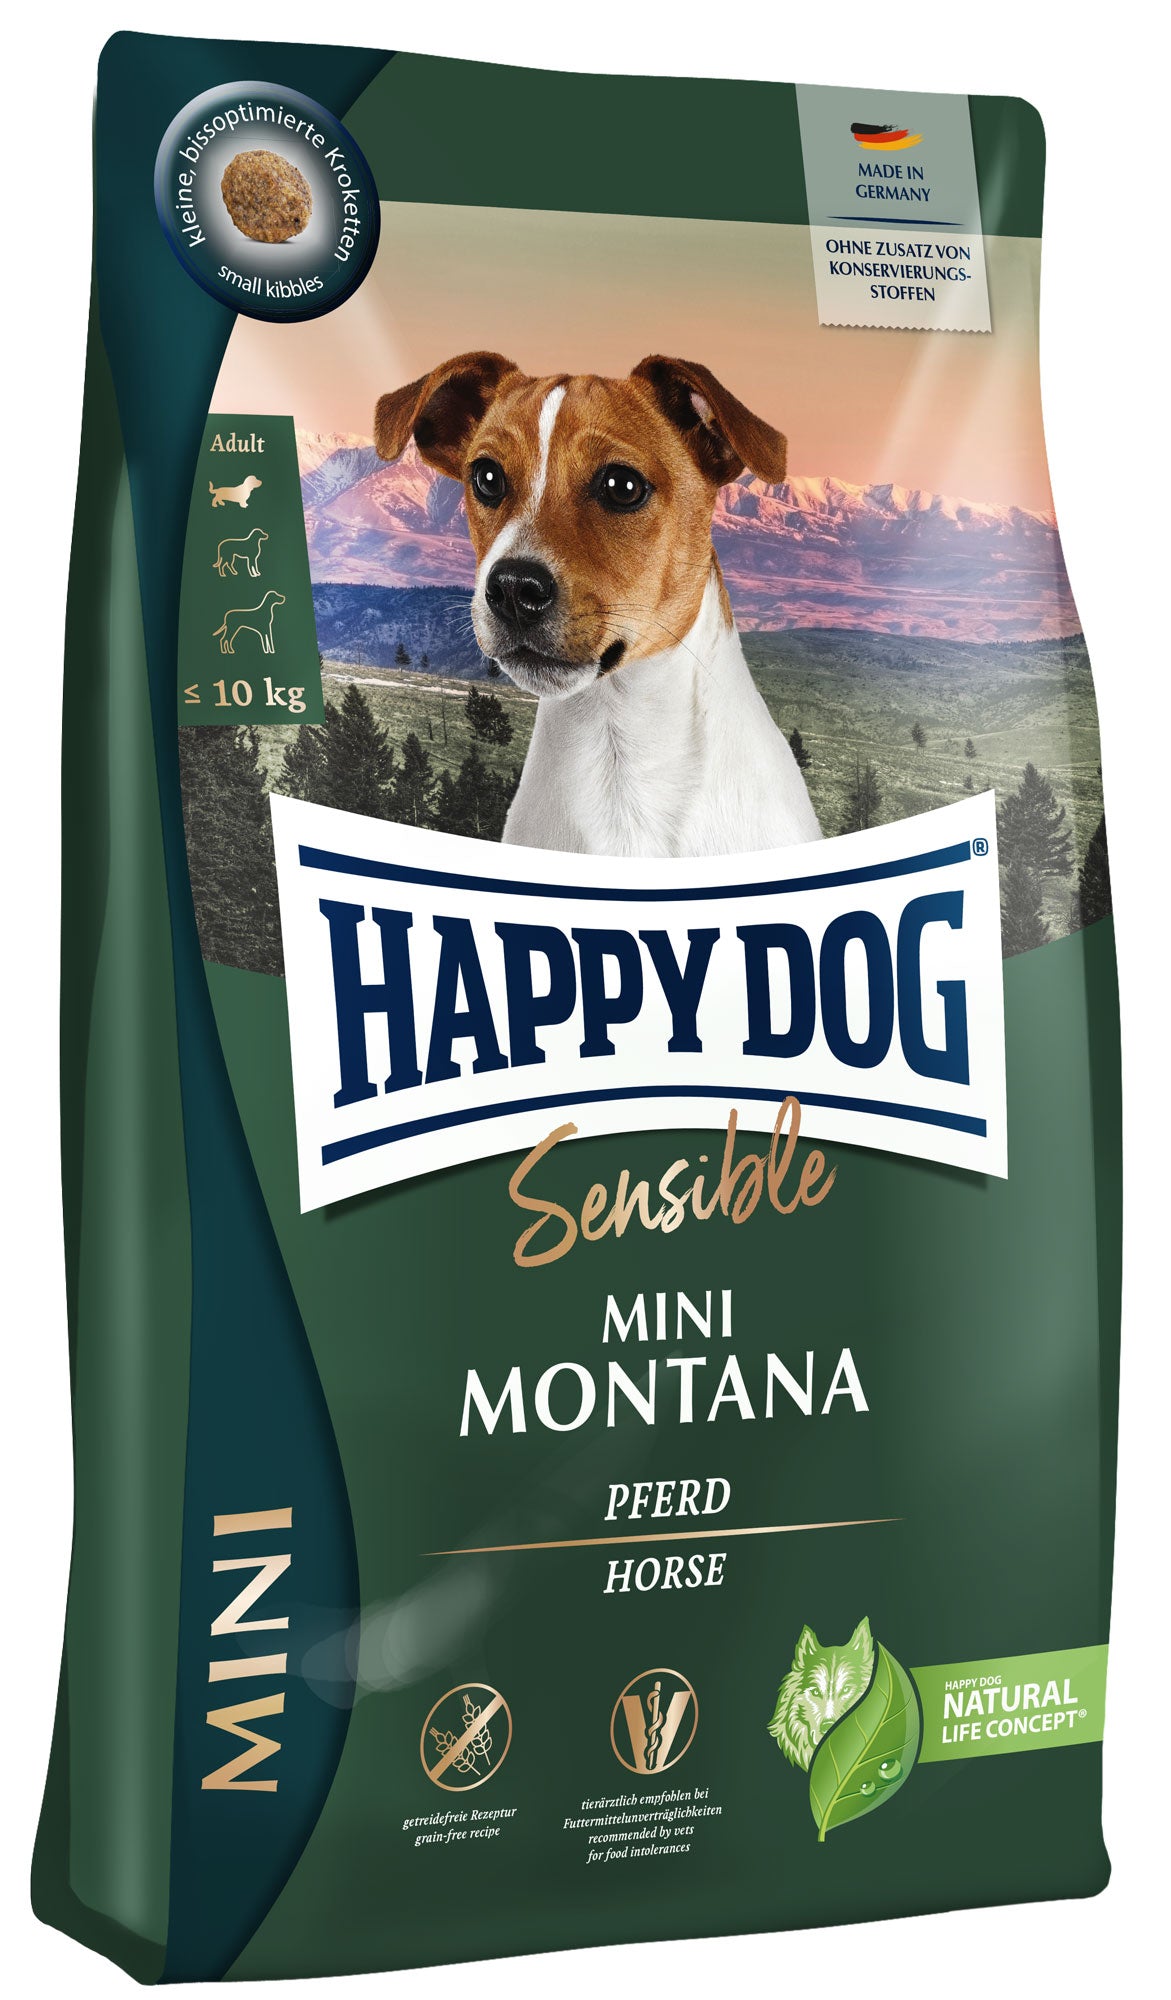 Sensitive Small breed Dog Food with Horse